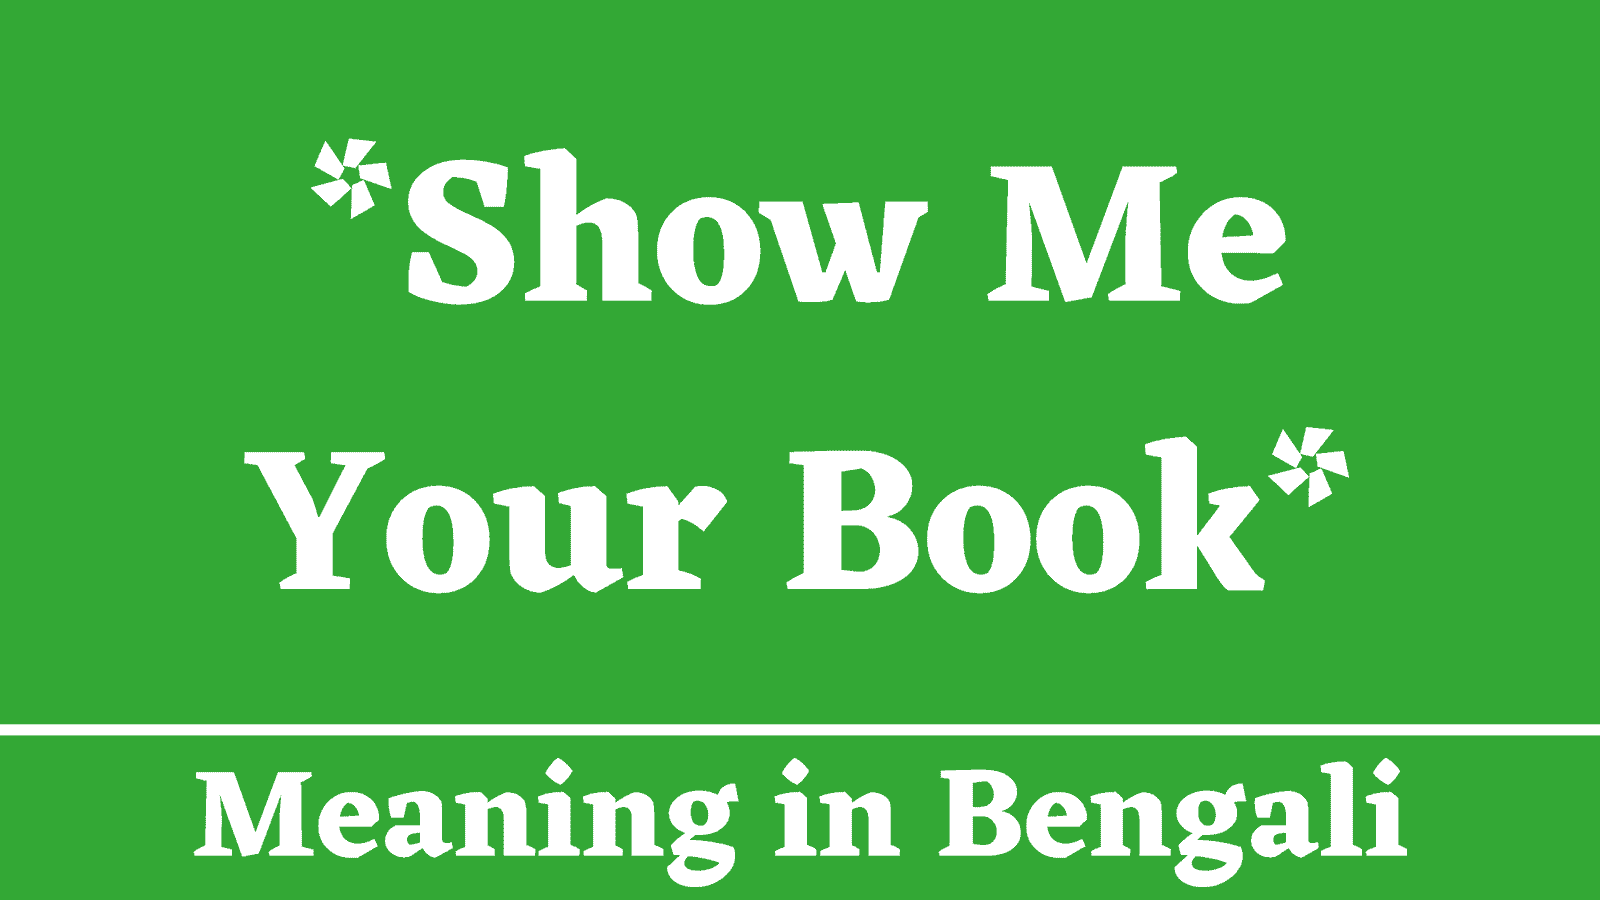 Show Me Your Book Meaning in Bengali